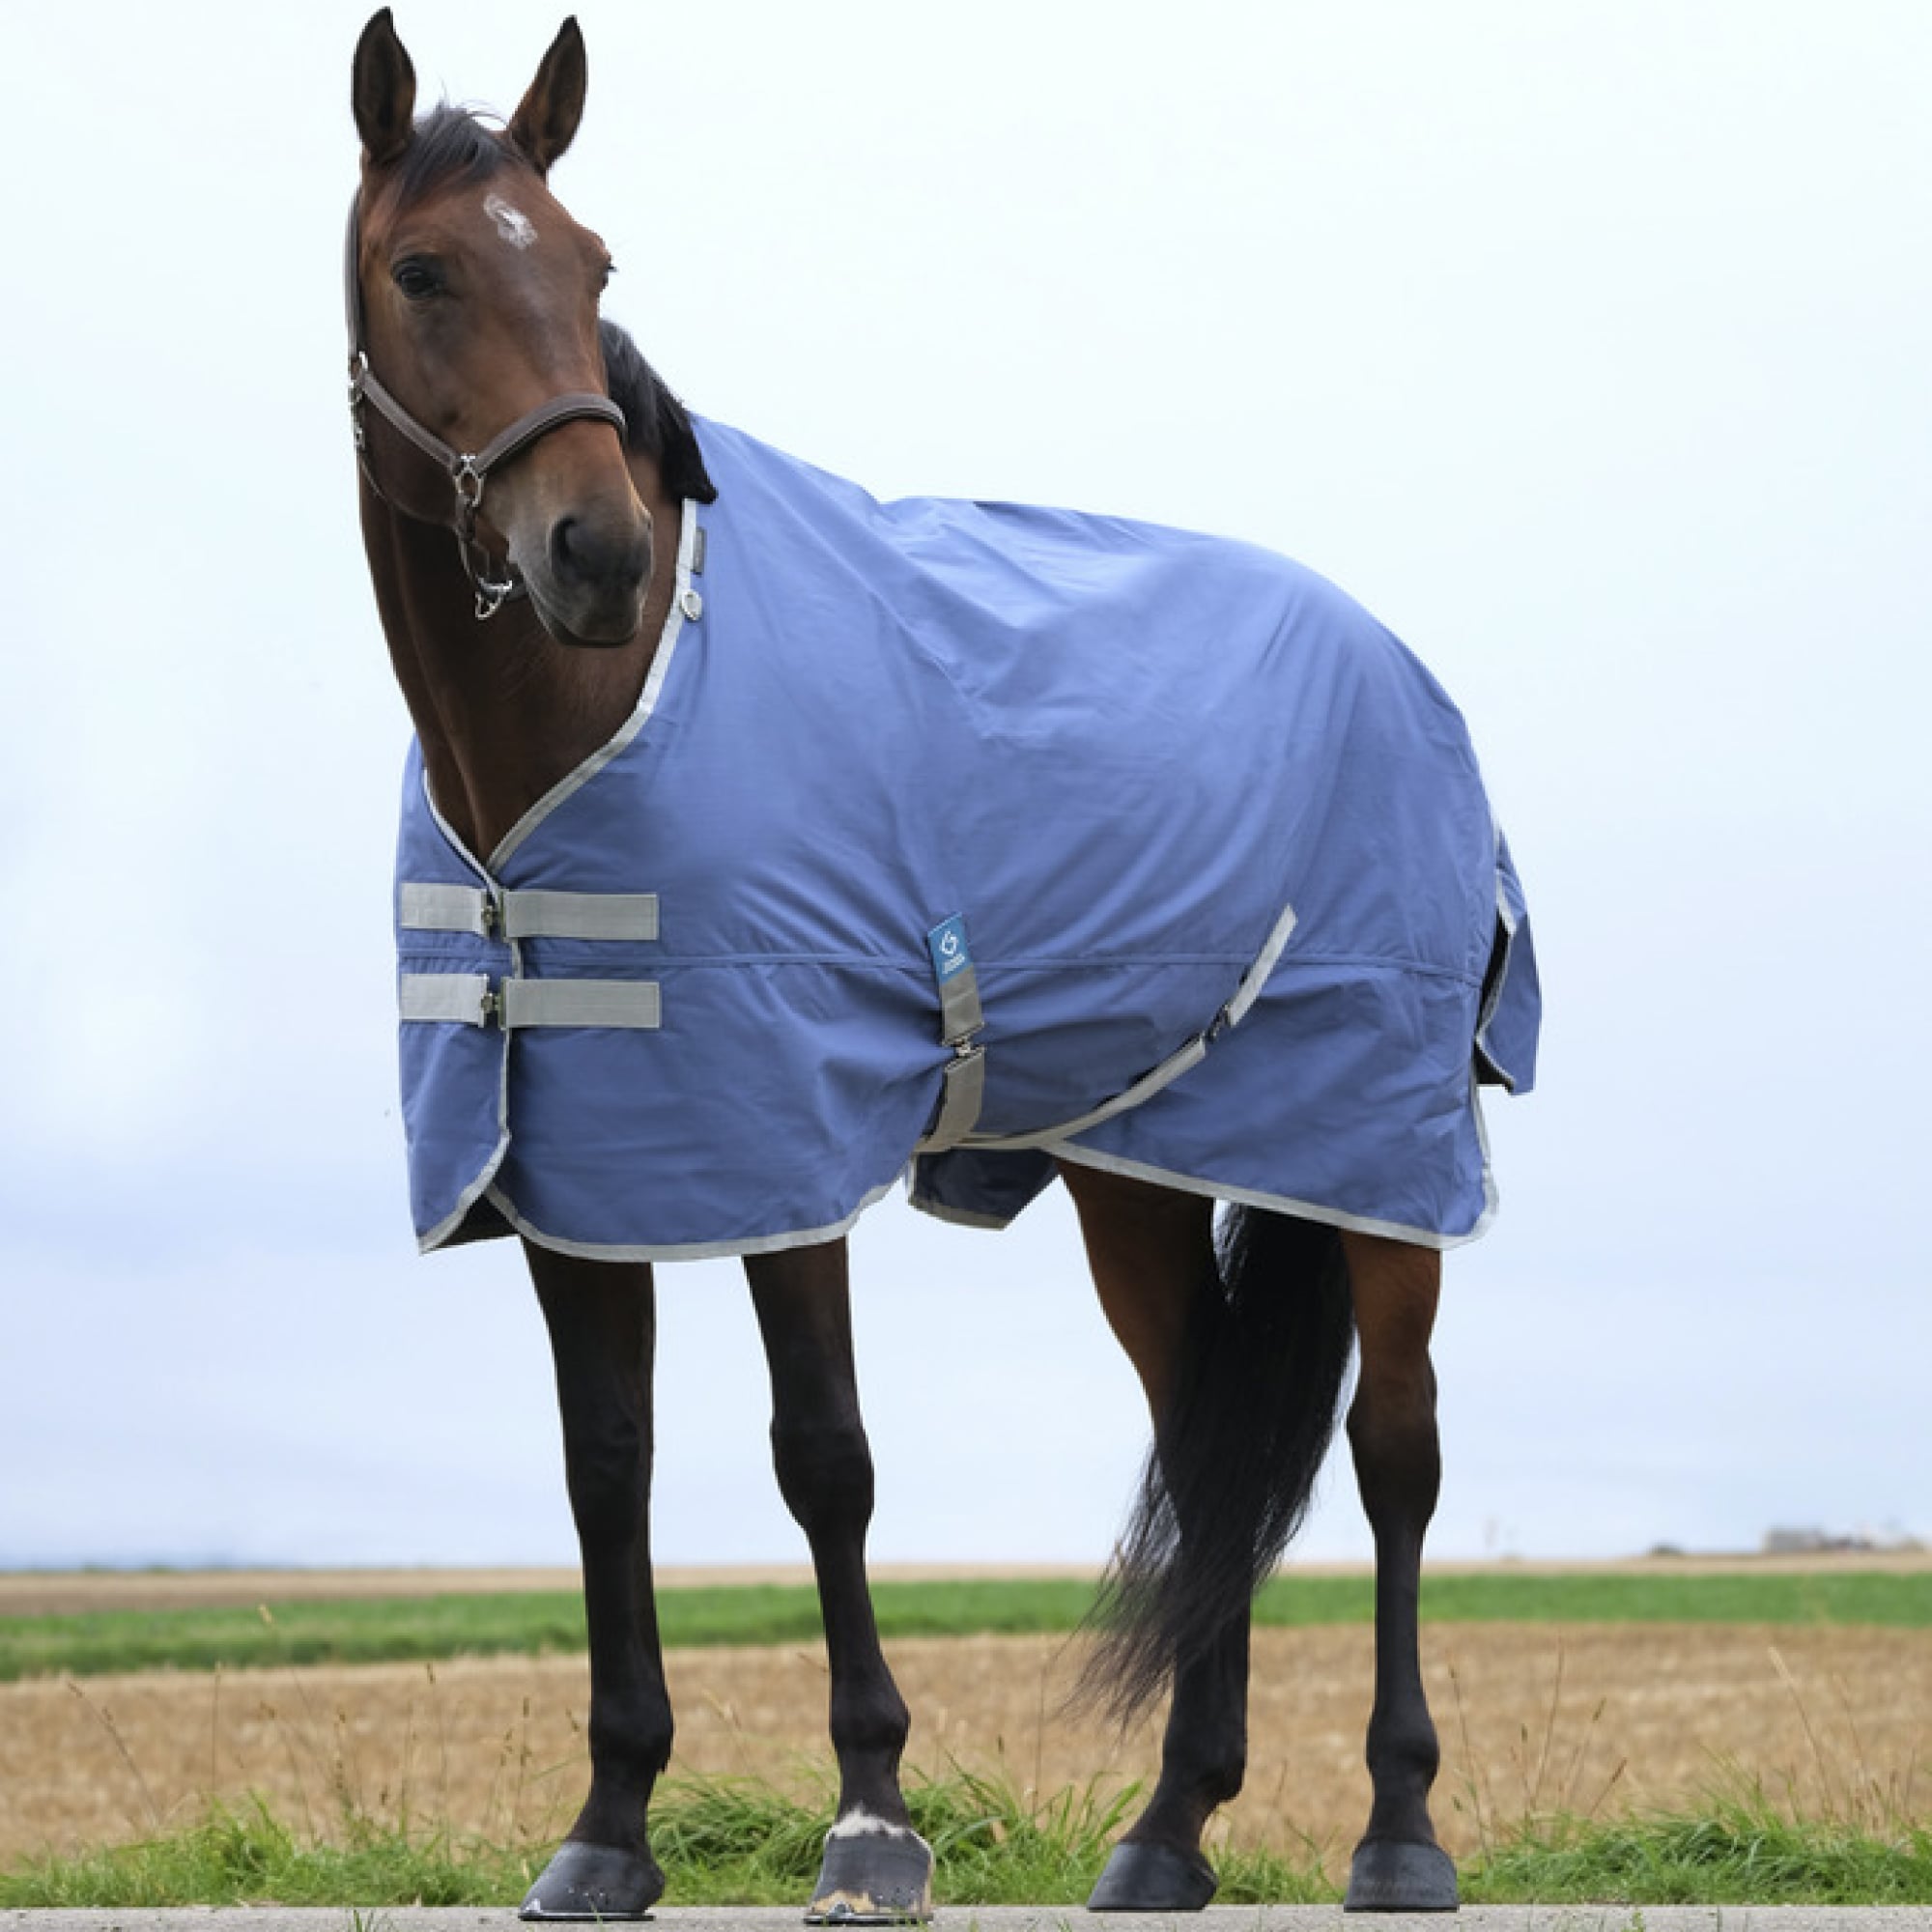 EQUITHÈME TYREX 600D RECYCLED TURNOUT RUG, 50 gr